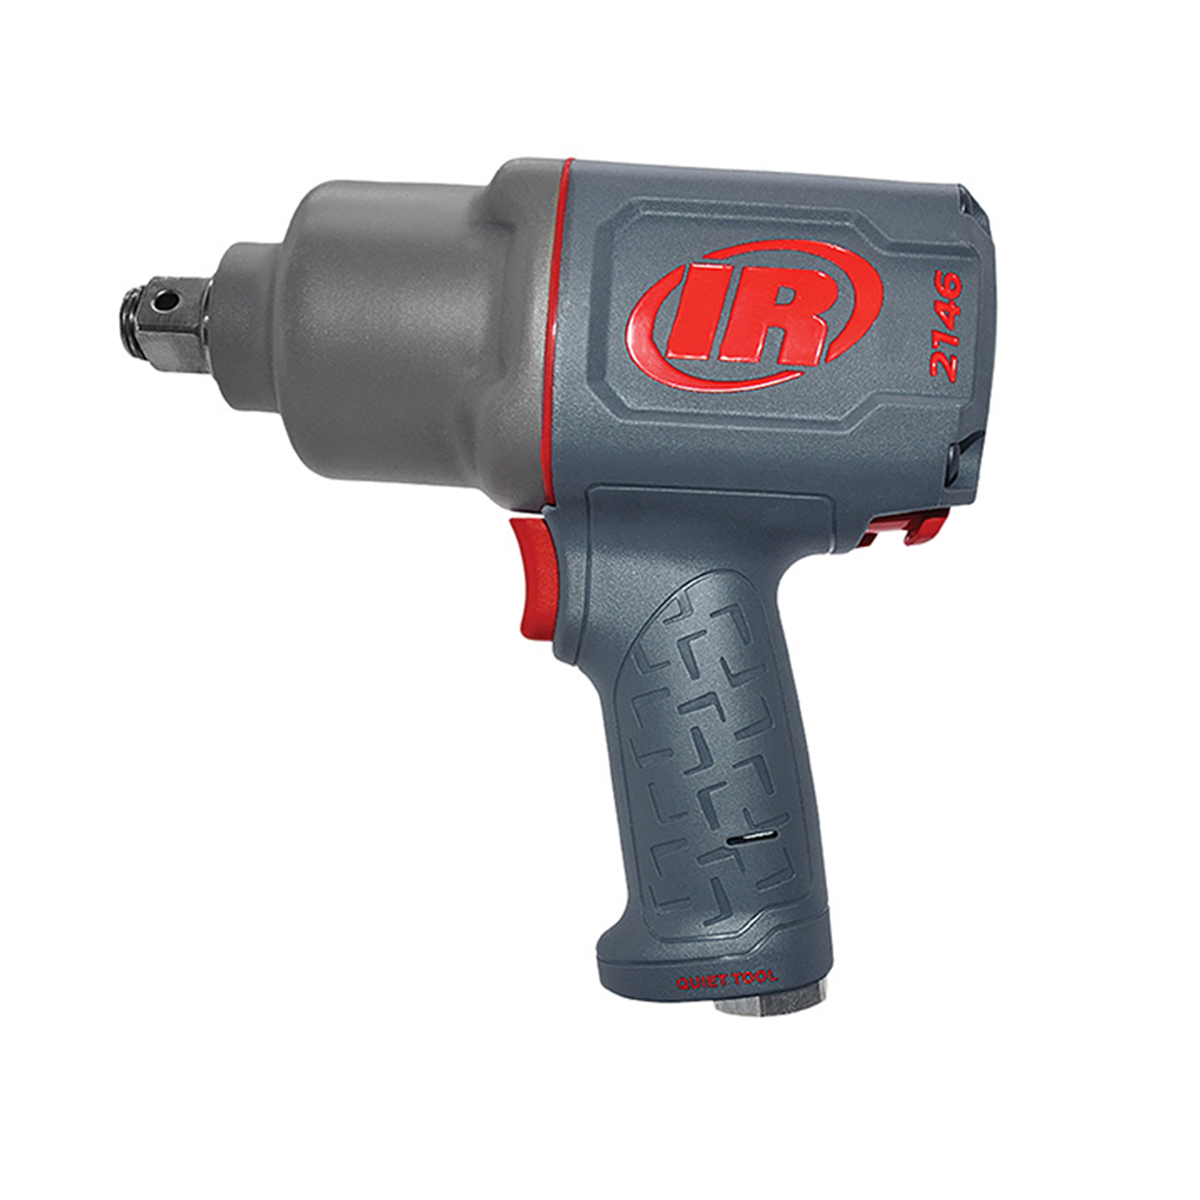 1" High Torque Impact Wrench